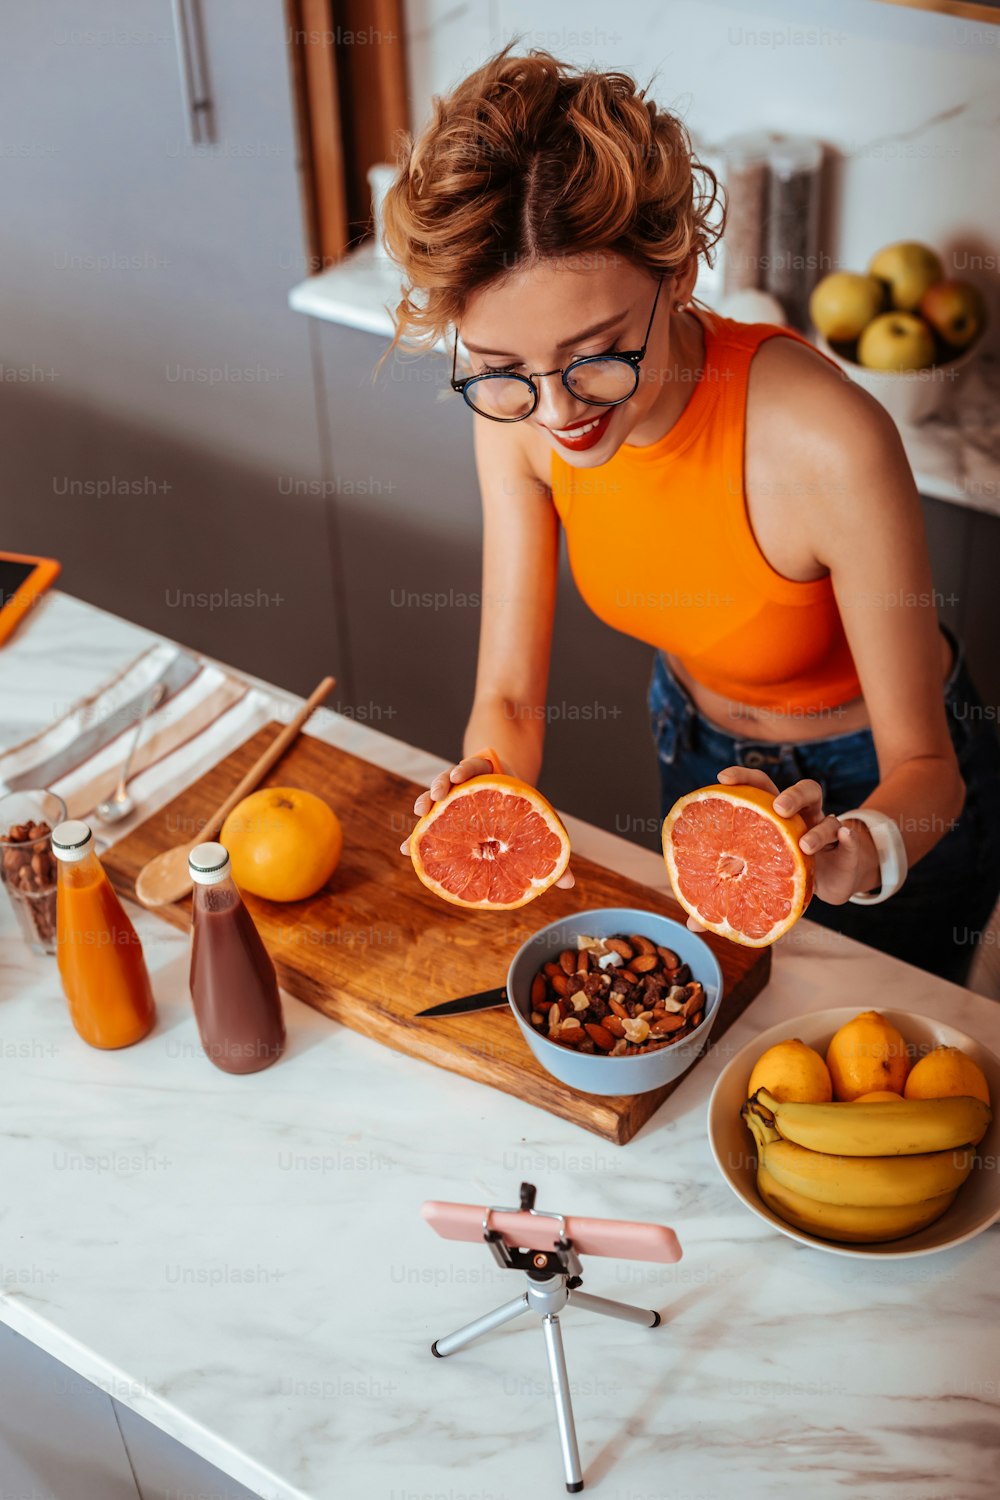 For the juice. Joyful positive woman showing two grapefruit halves while wanting to make a juice